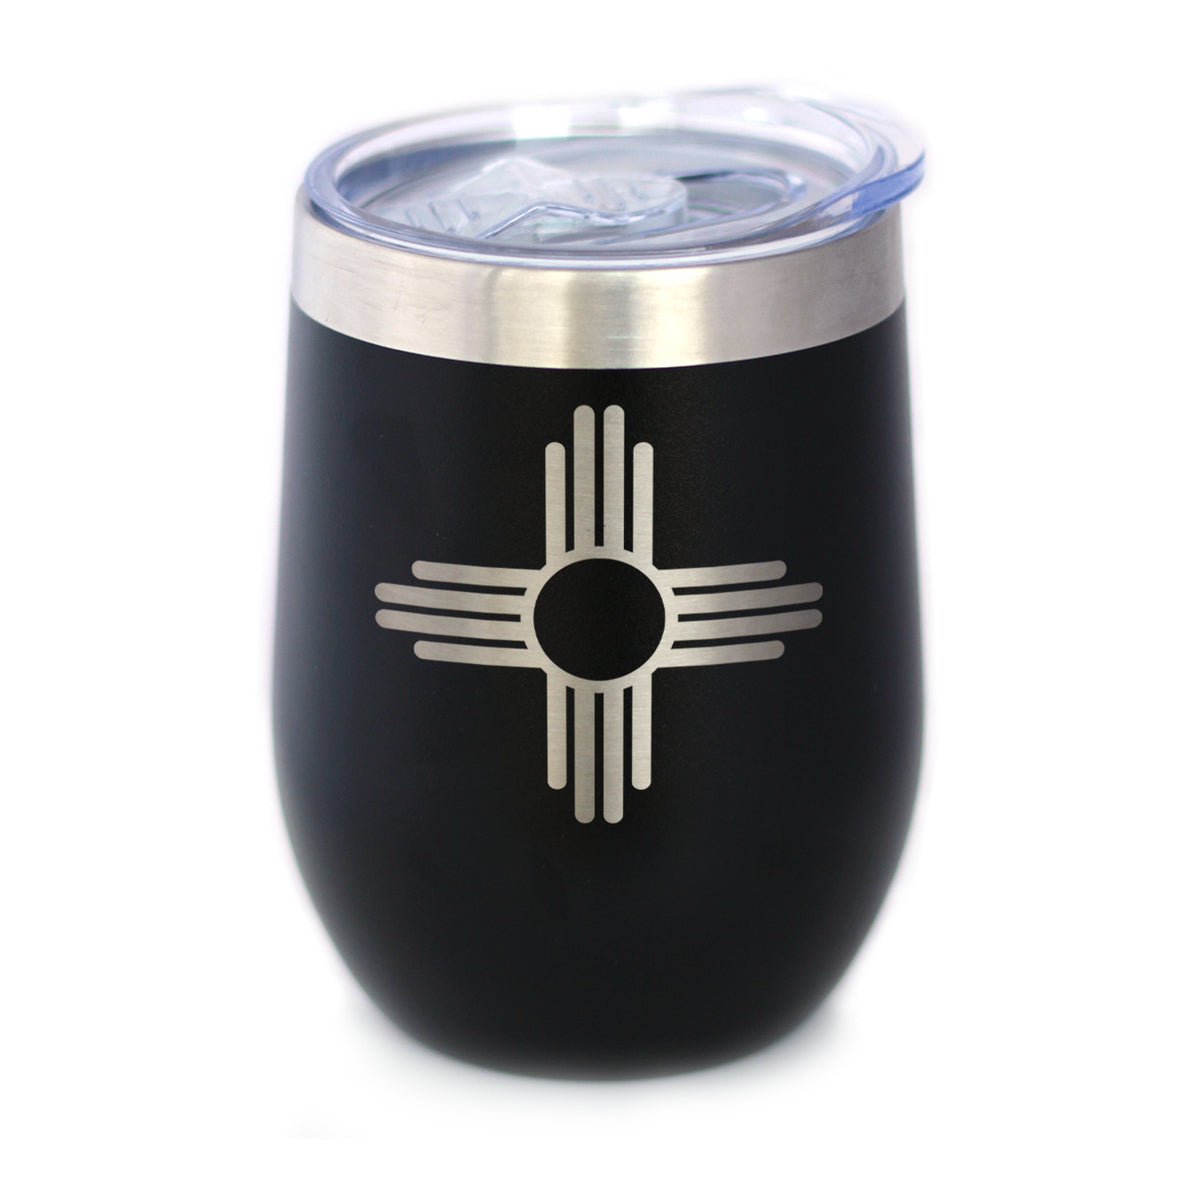 Flag of New Mexico - Wine Tumbler Glass with Sliding Lid - Stainless Steel Insulated Mug - New Mexico Themed Gifts for Women and Men